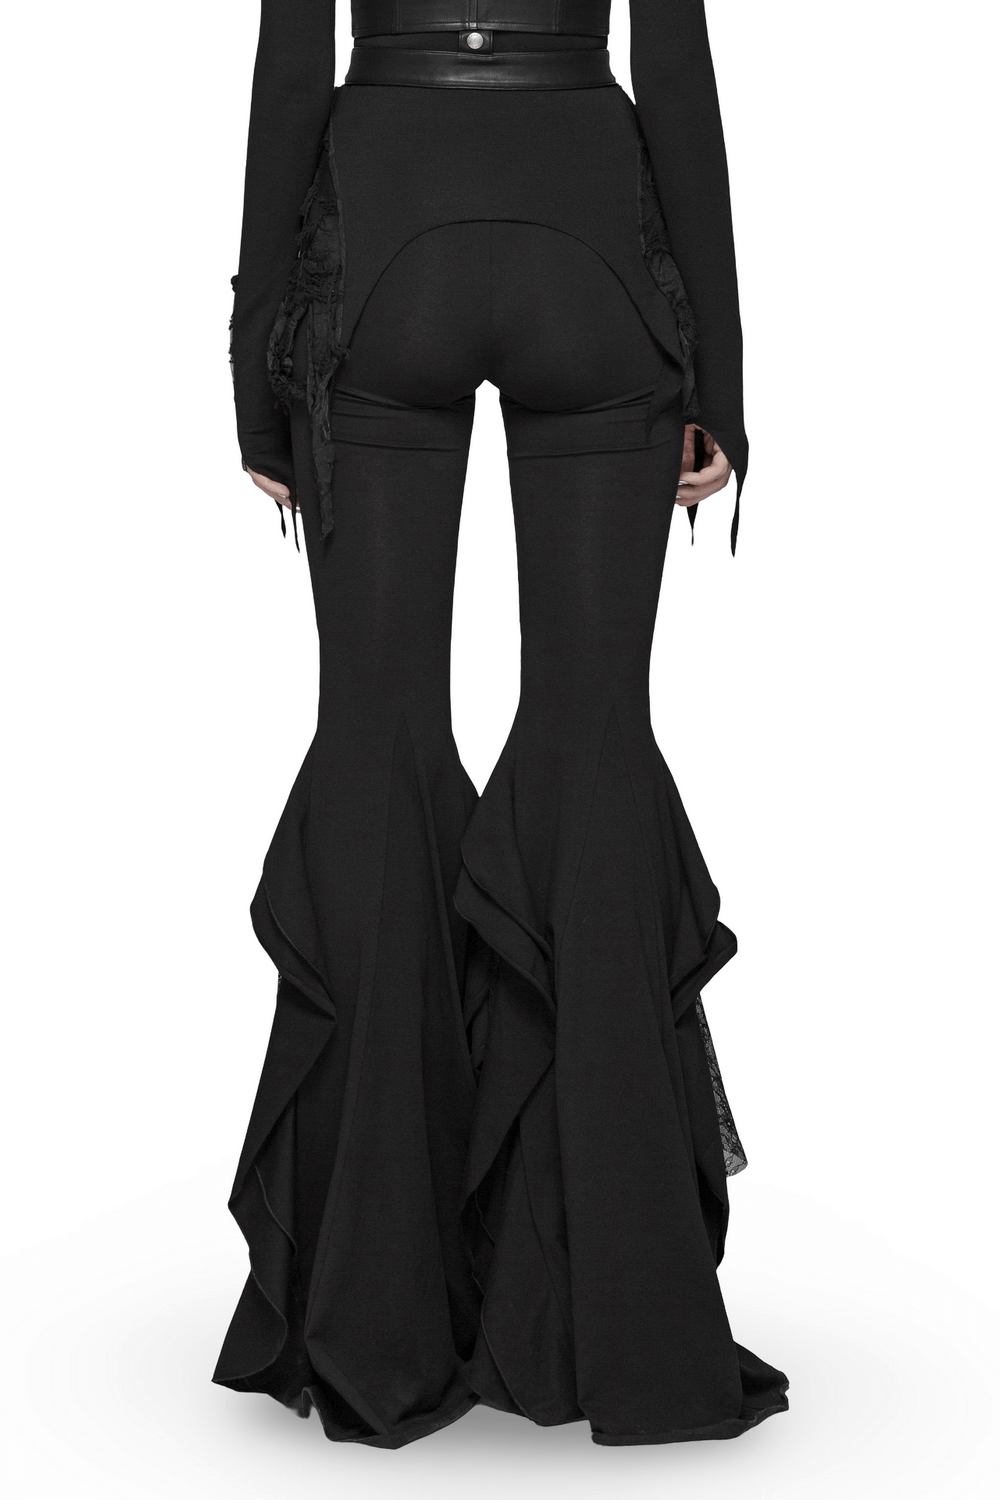 Stylish Female Flared Pants with Lace Trim Detail